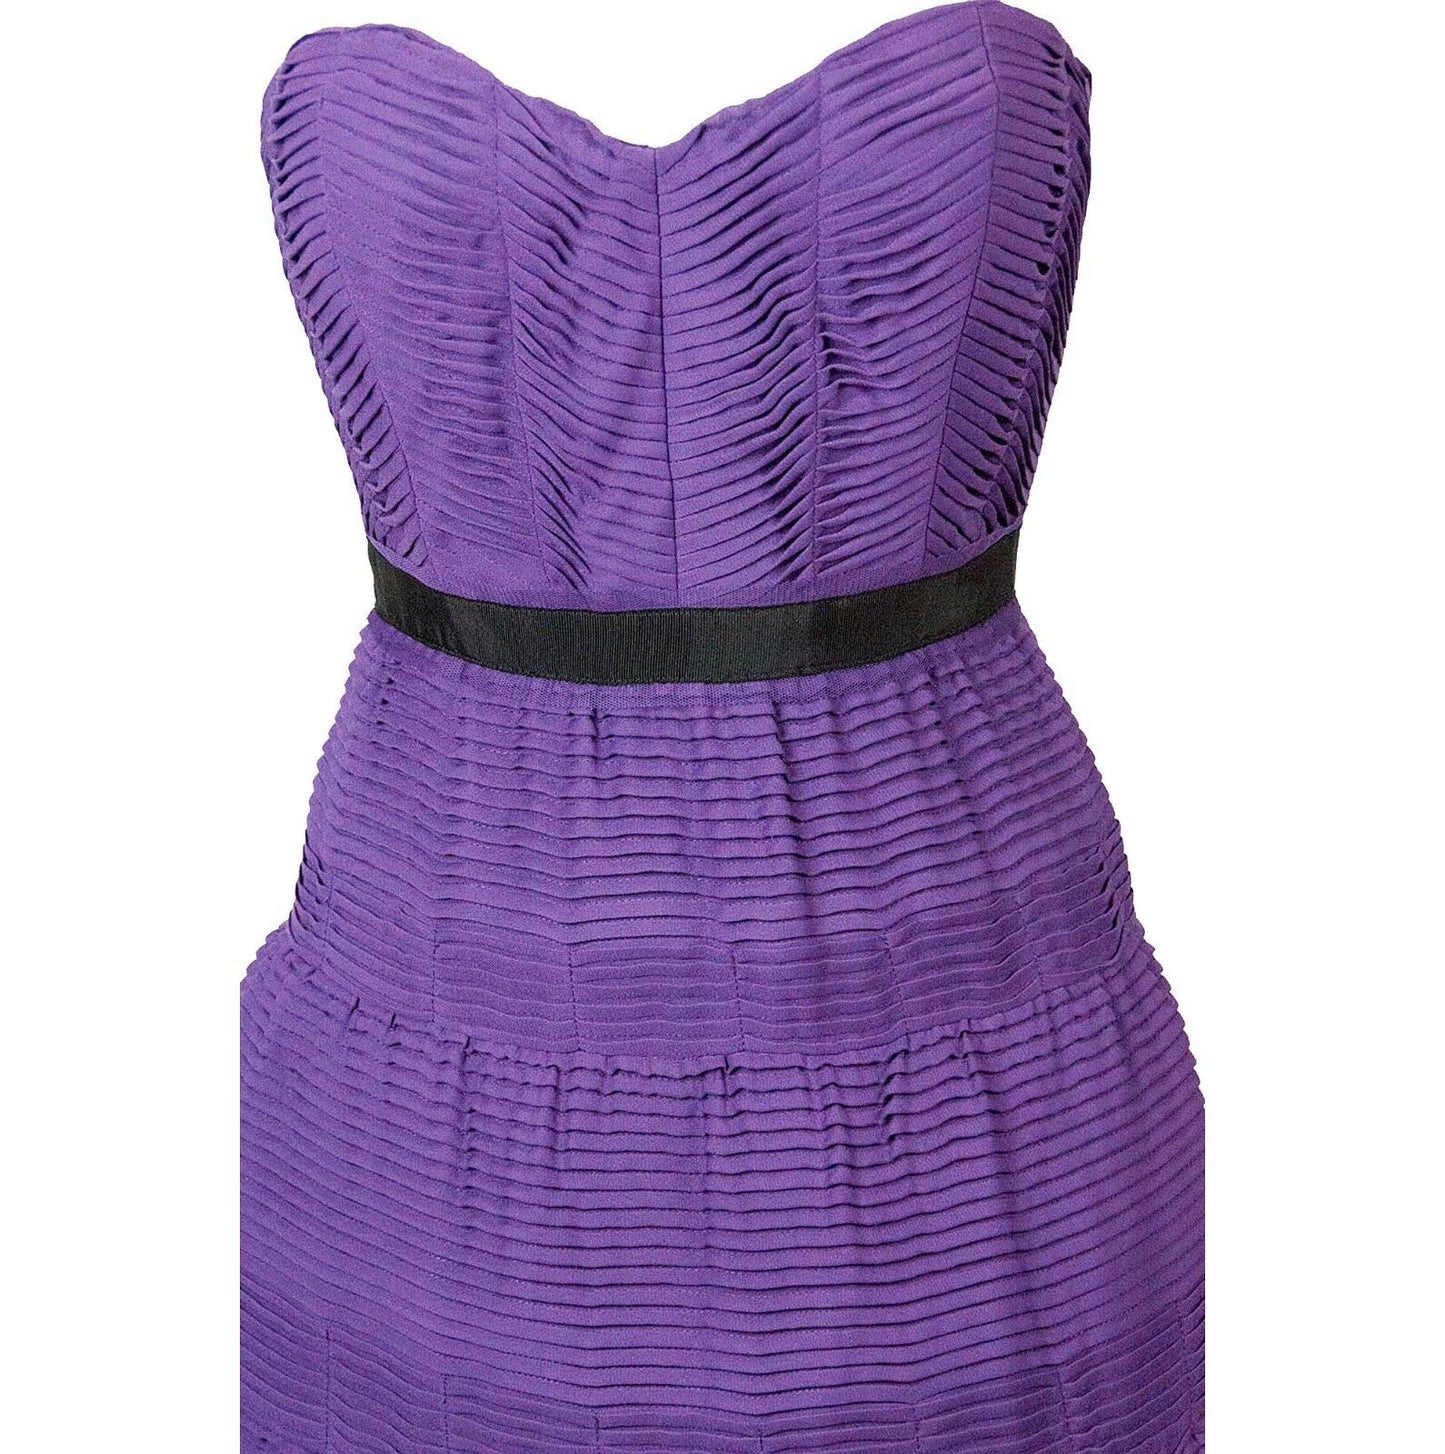 BCBGMaxAzria Purple Strapless Lined Cocktail Party Prom Dress 4 $328 NWT